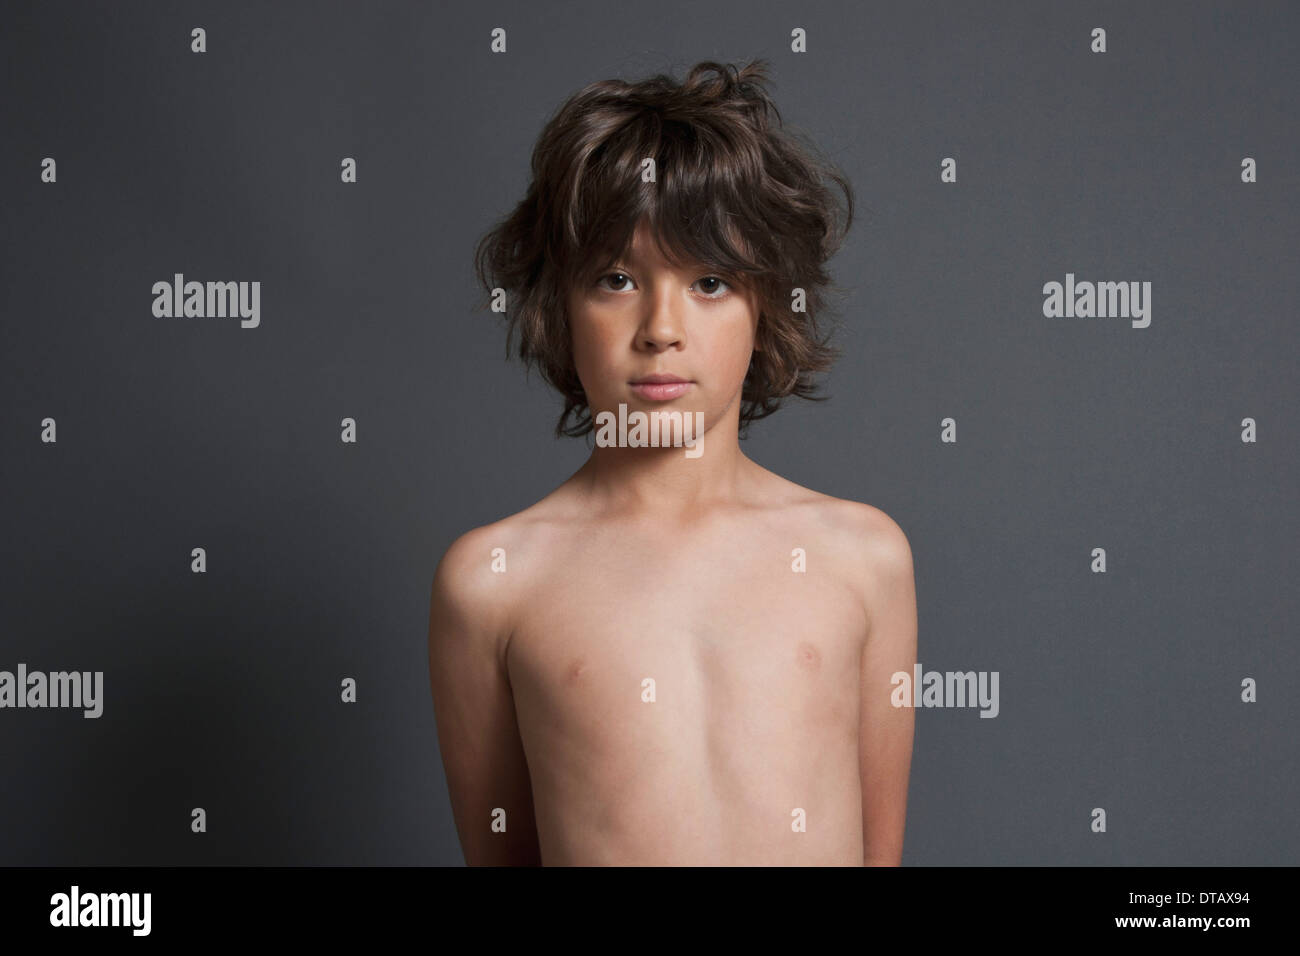 Page 2 Shirtless Boys High Resolution Stock Photography And Images Alamy